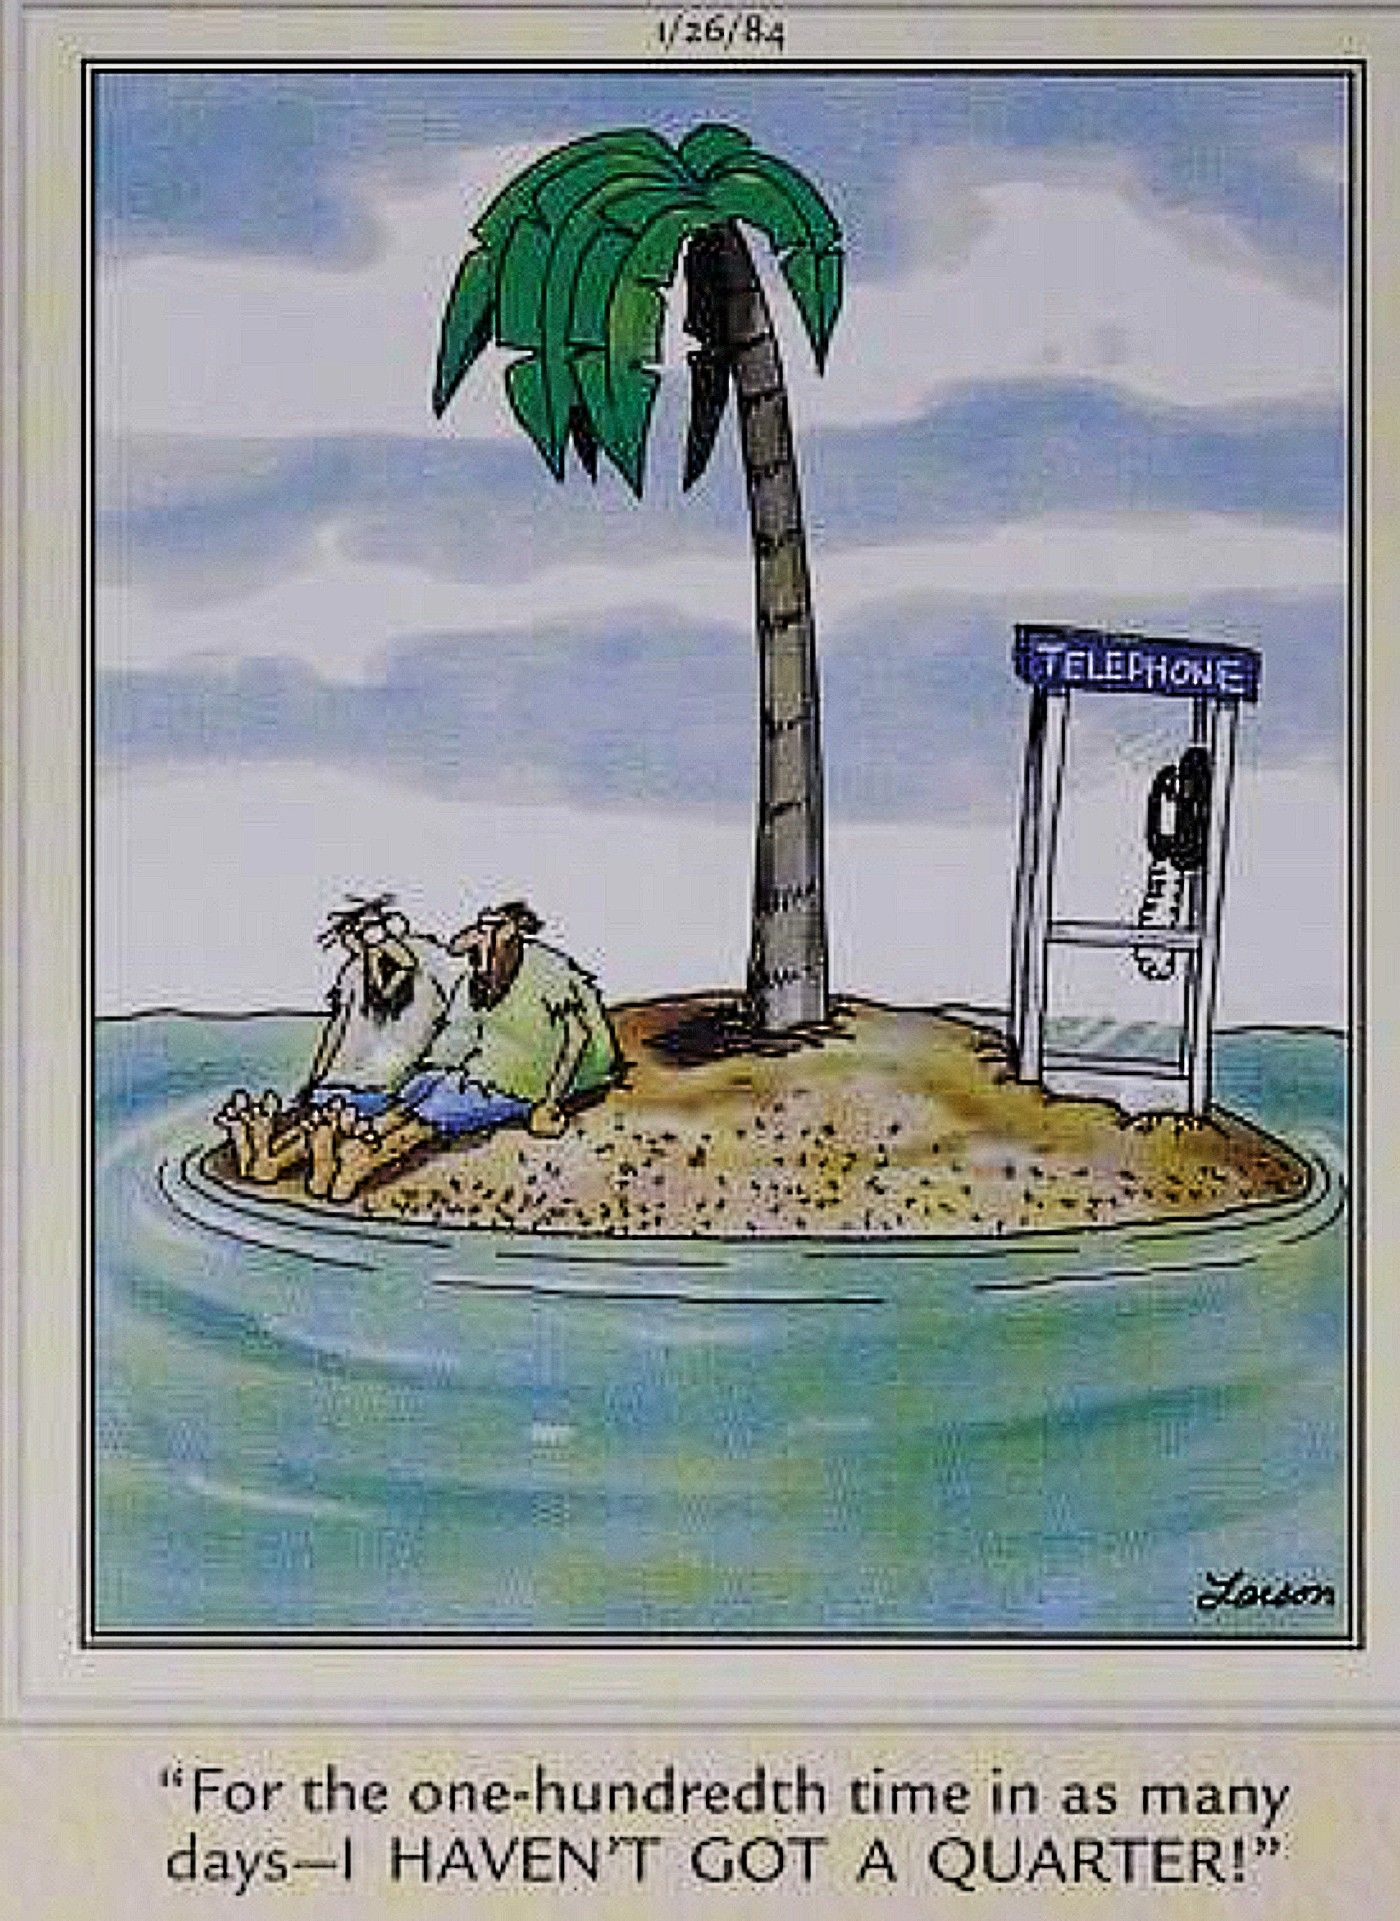 Far Side, men stranded on desert island with phone booth have no quarters